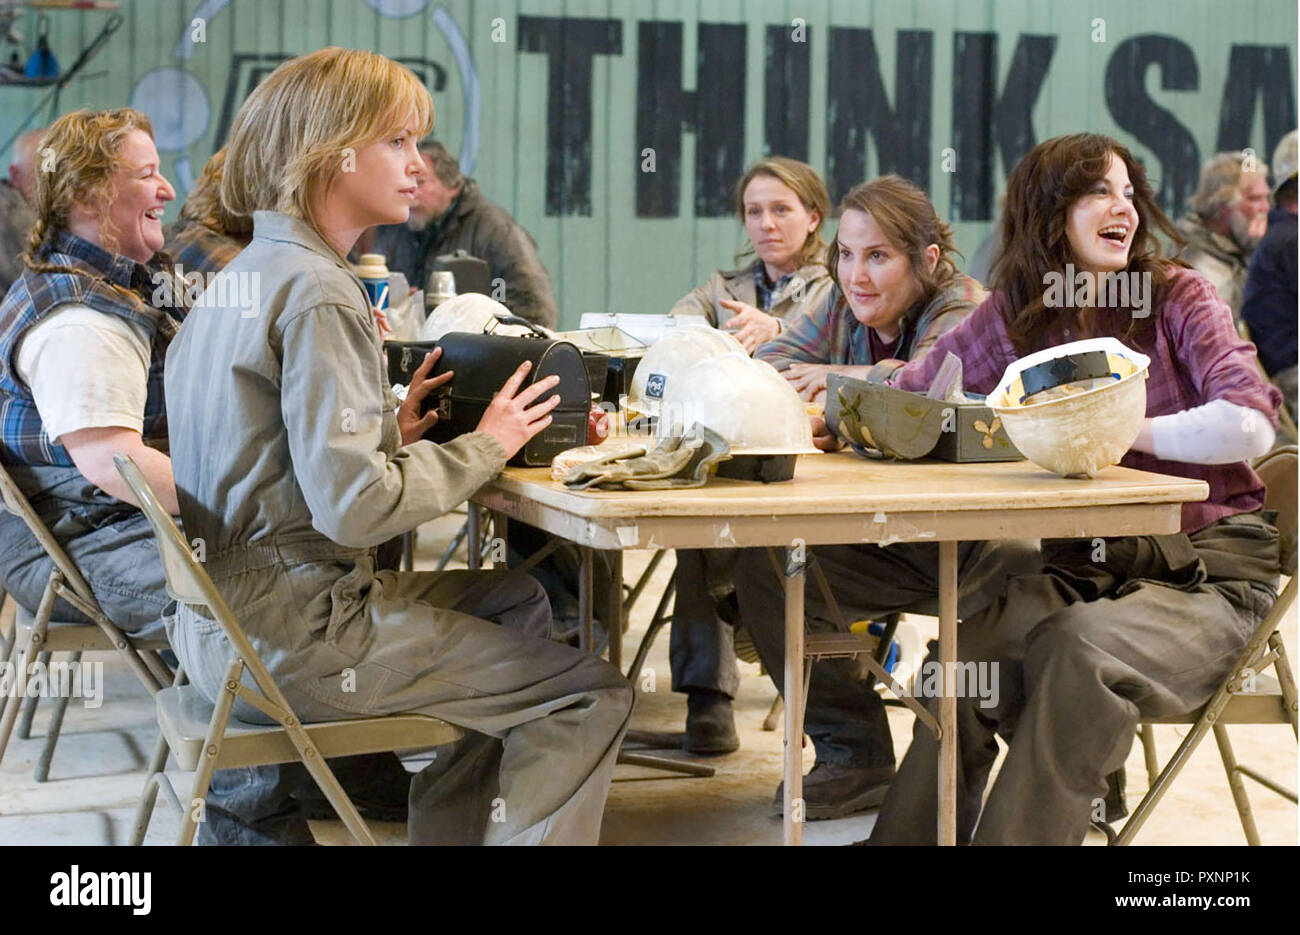 Kaltes Land aka. North Country, 2005 Regie: Niki Caro, The mine workers: Josey (CHARLIZE THERON), Big Betty (RUSTY SCHWIMMER), Glory (FRANCES MCDORMAND), Peg (JILLIAN ARMENANTE) and Sherry (MICHELLE MONAGHAN) Stock Photo